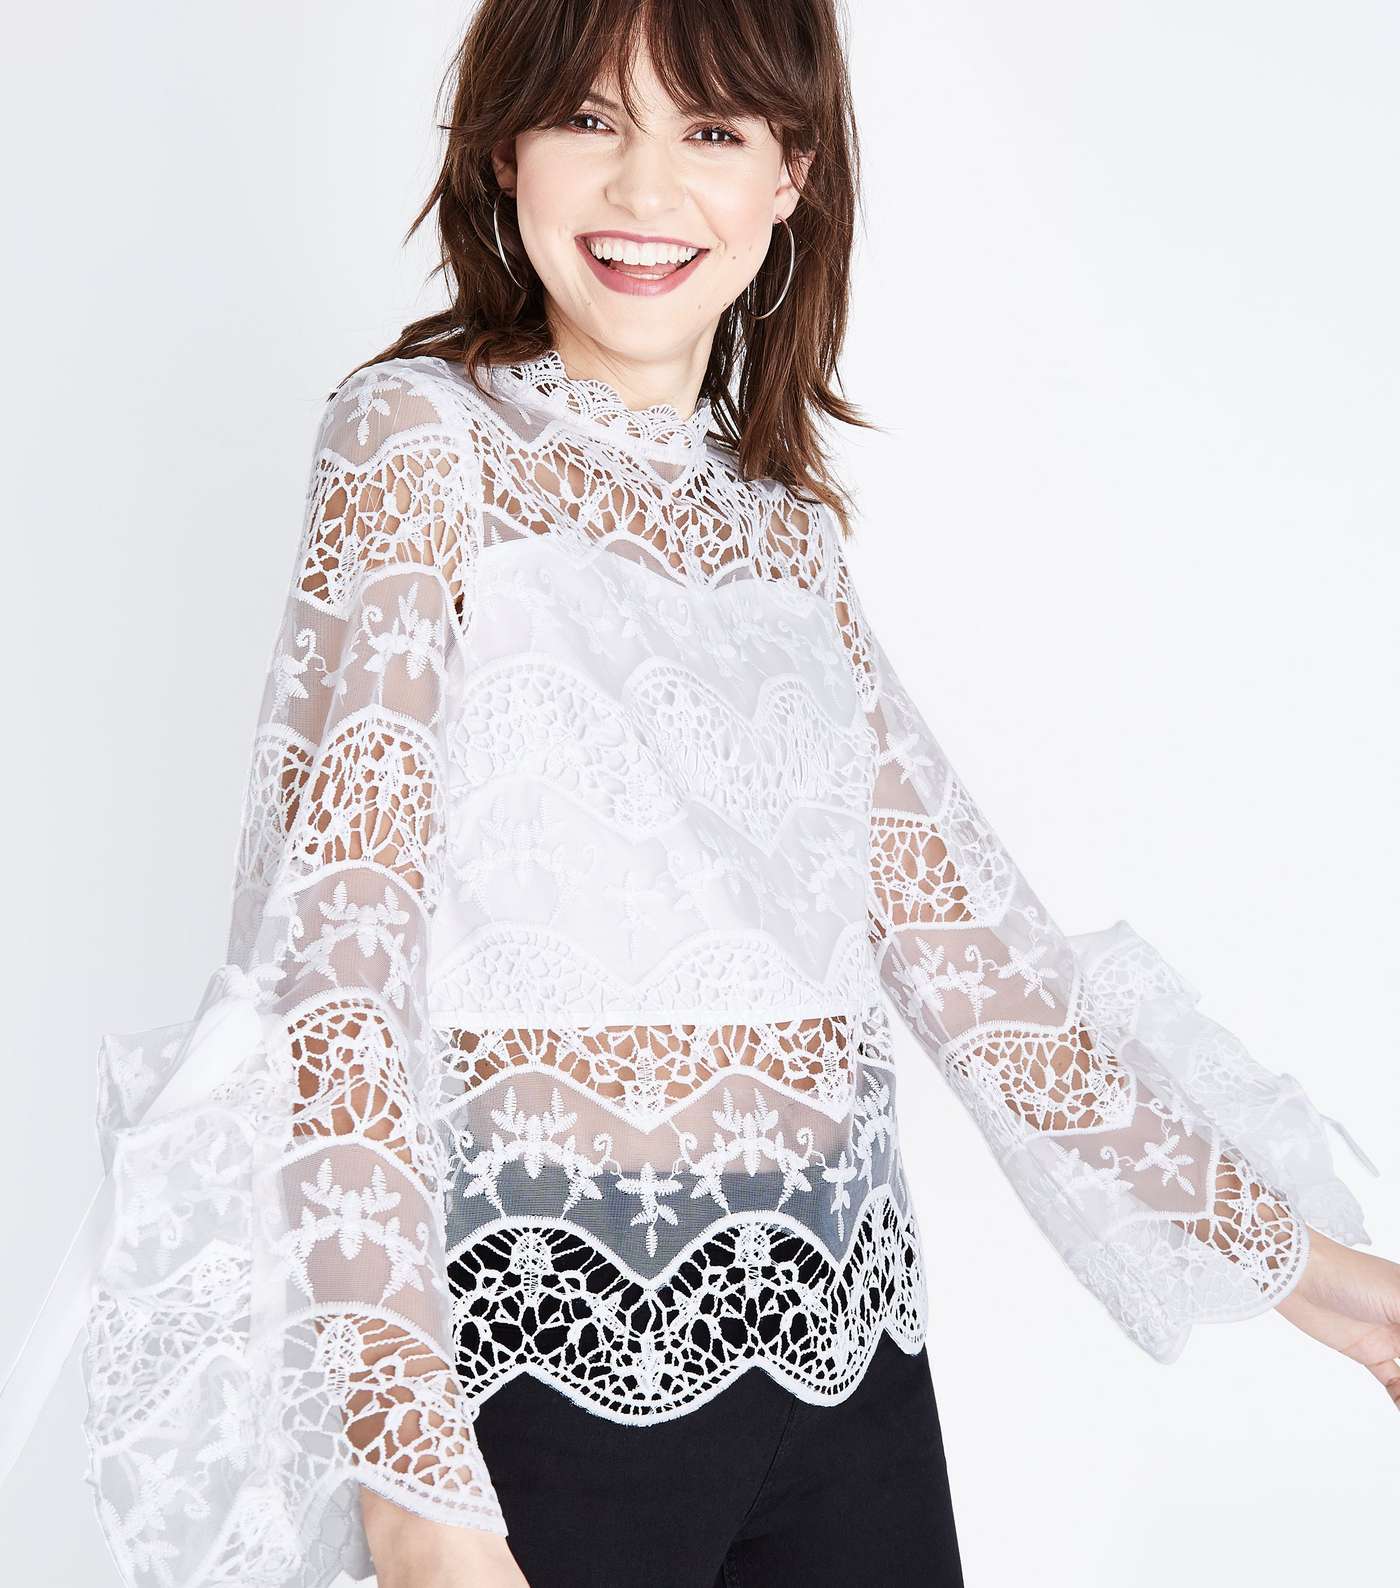 Parisian White Lace Frill Sleeve Top Image 5